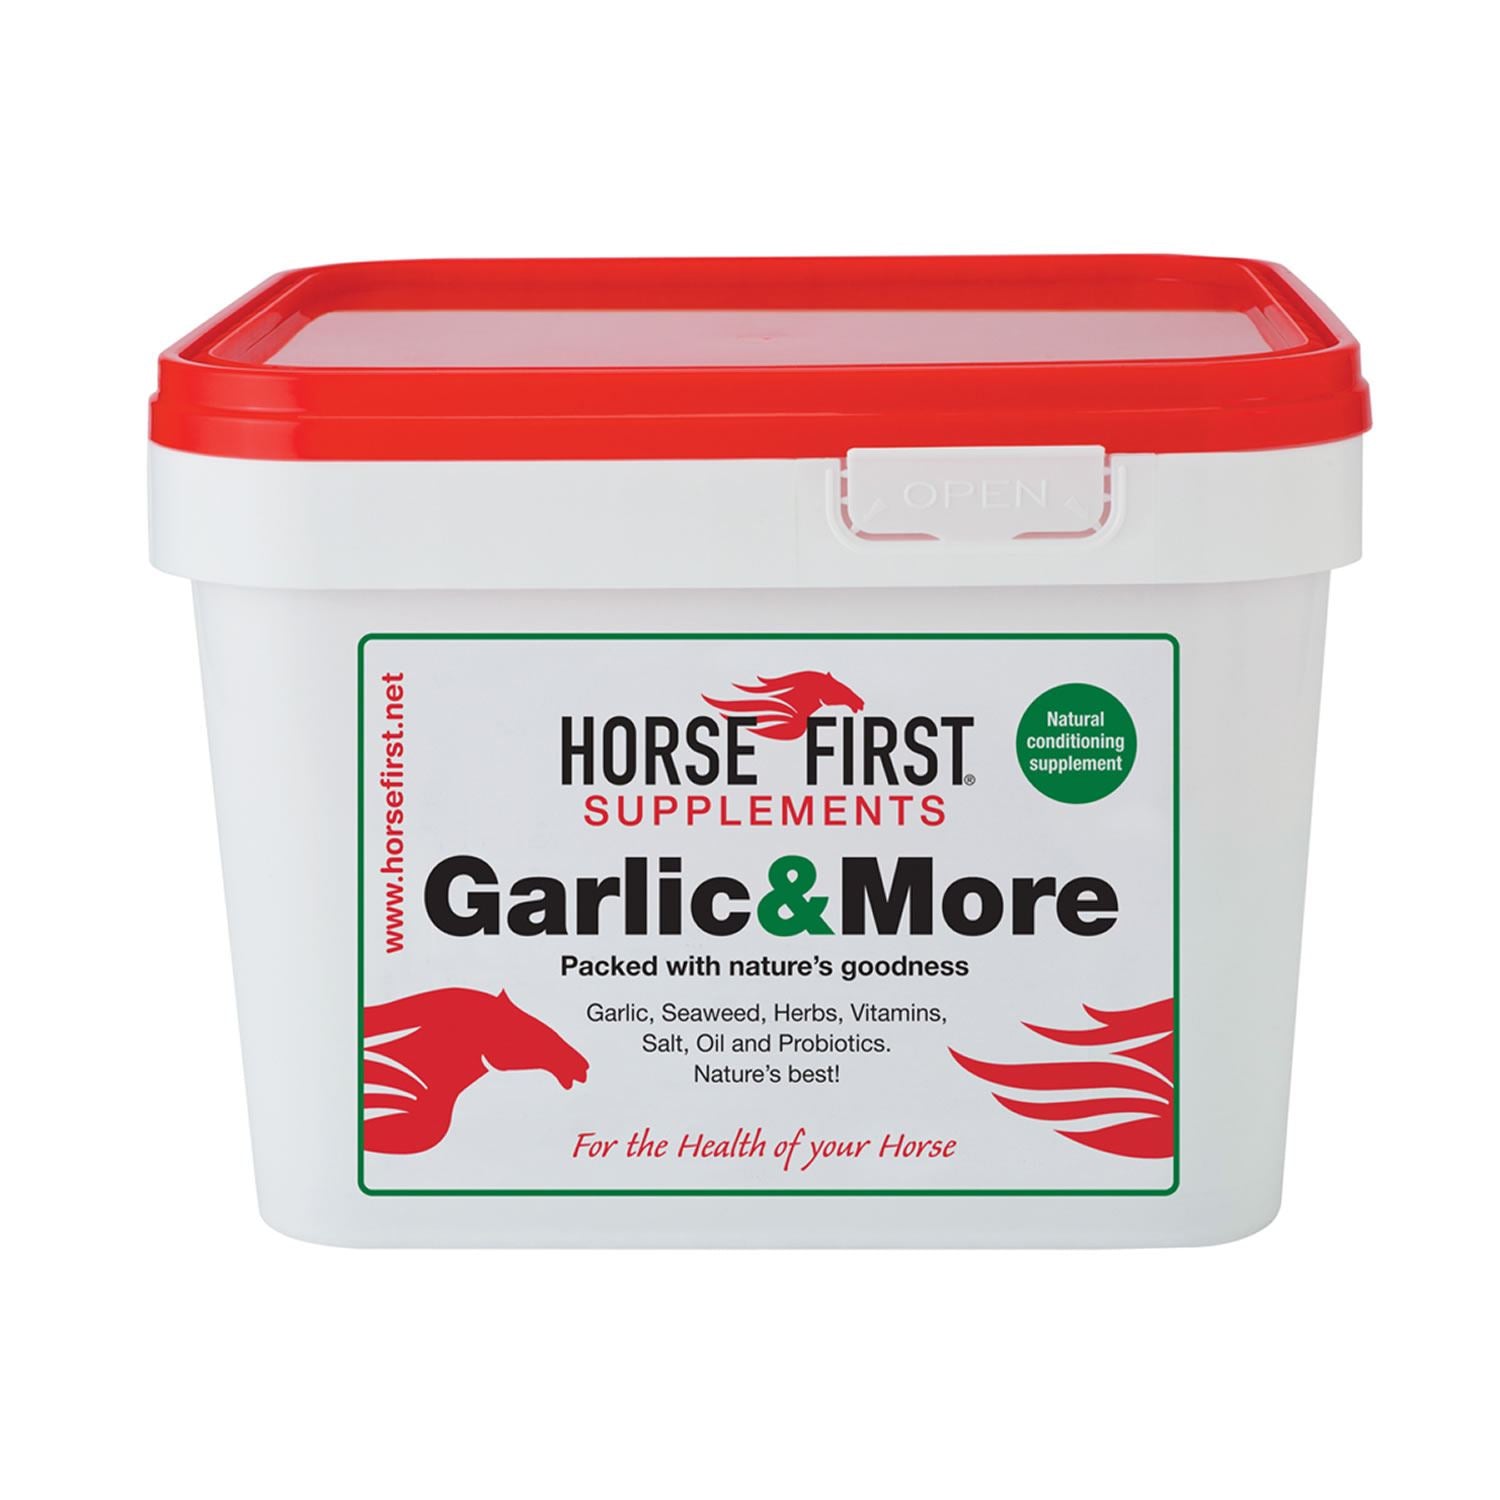 Horse First Garlic & More - natural supplement for horses and ponies, supporting digestive and immune systems.